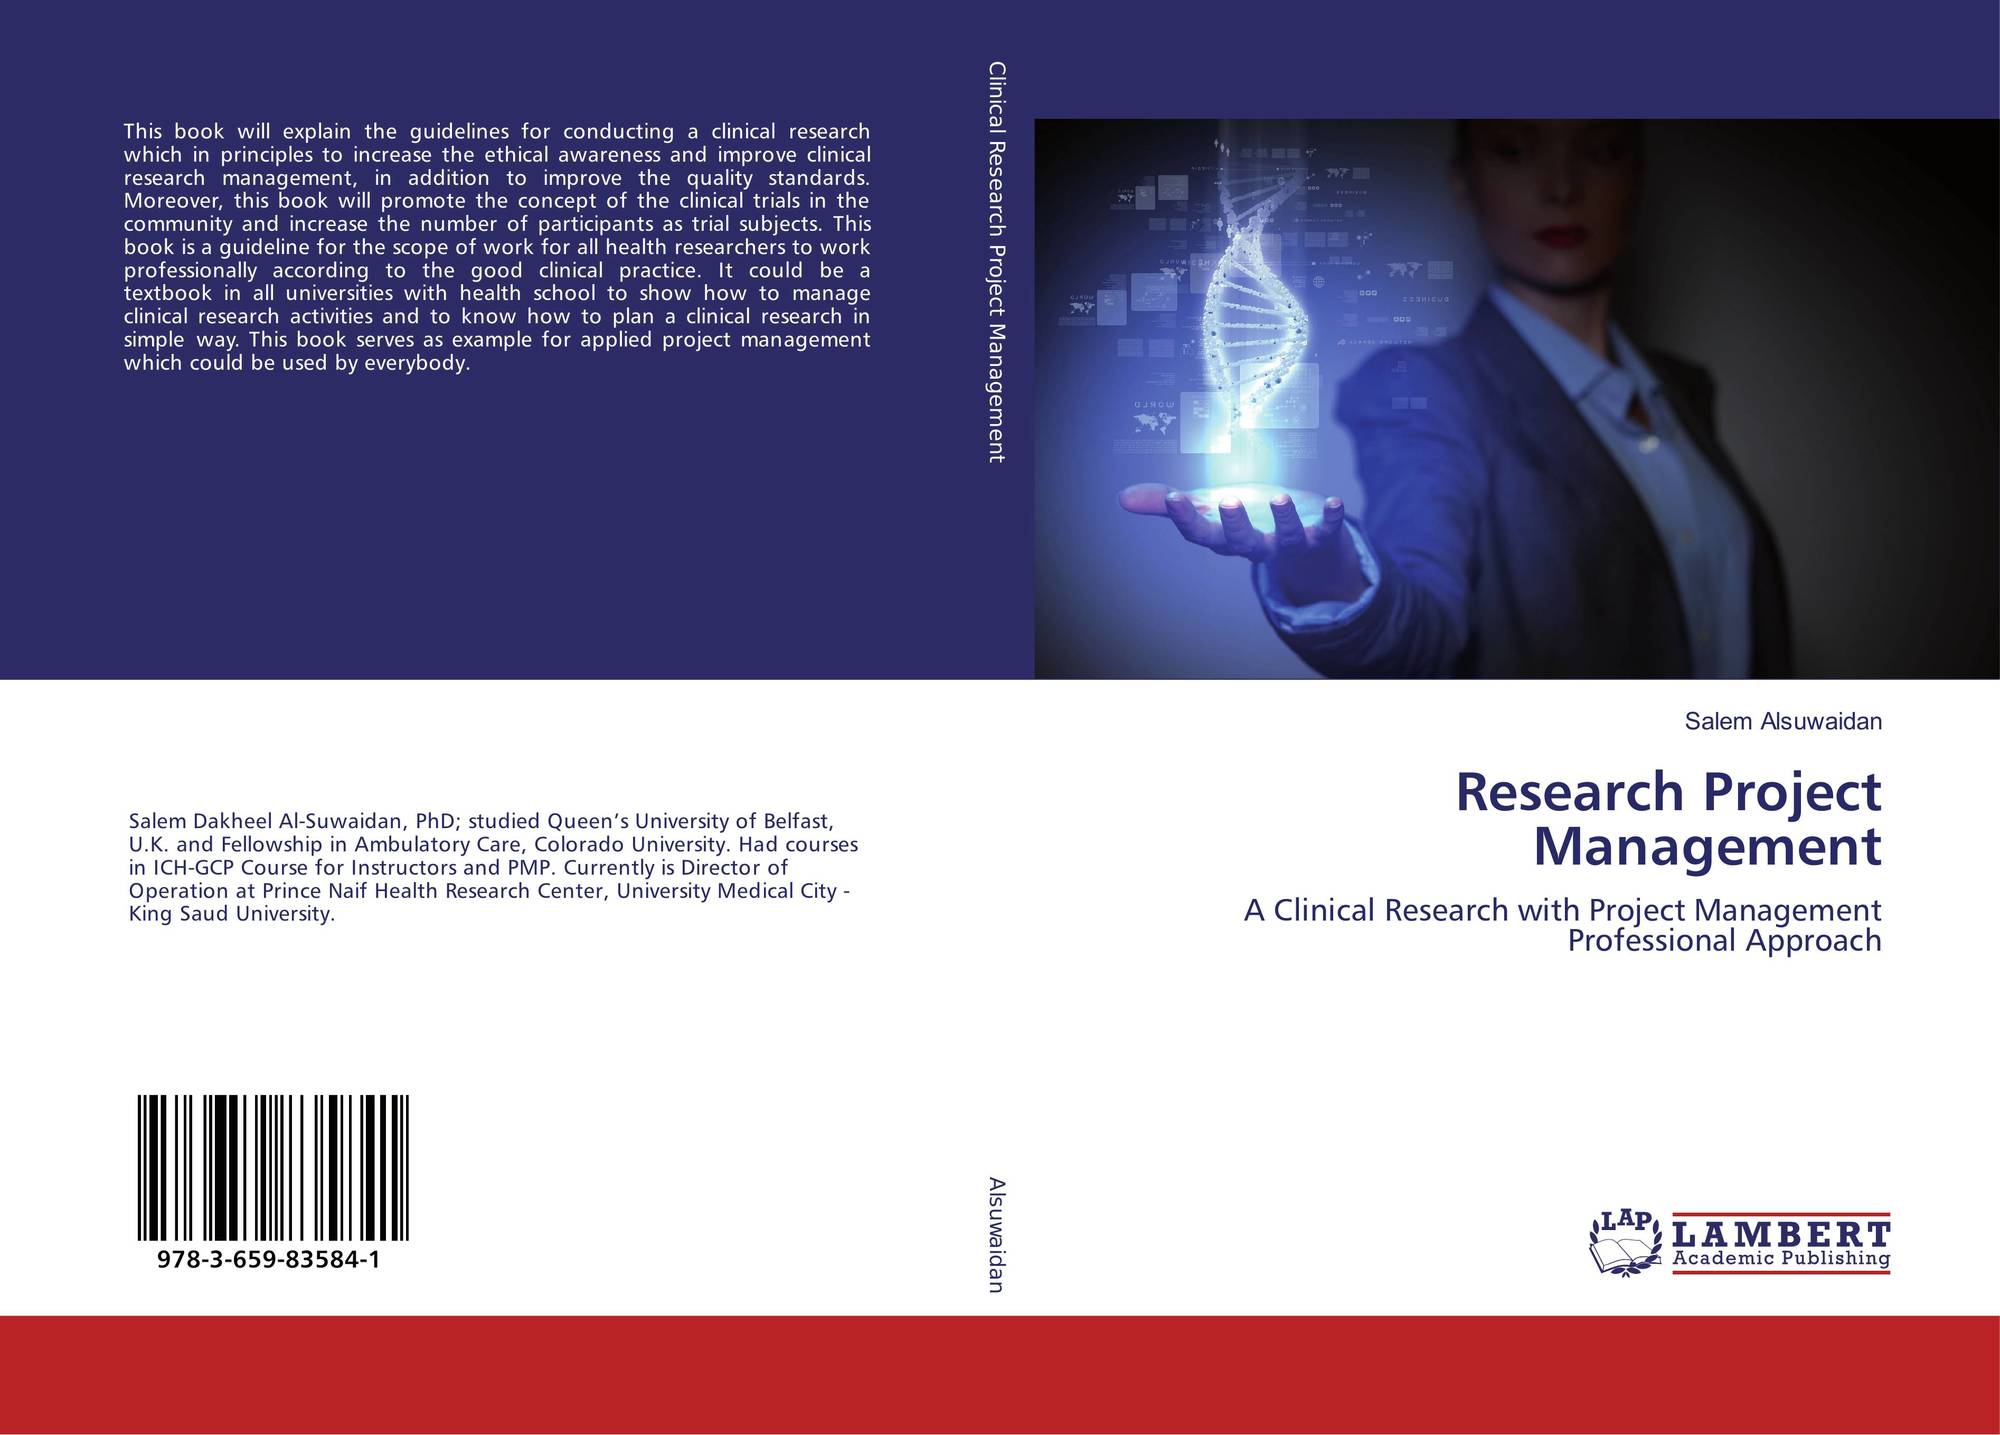 research and project management professional